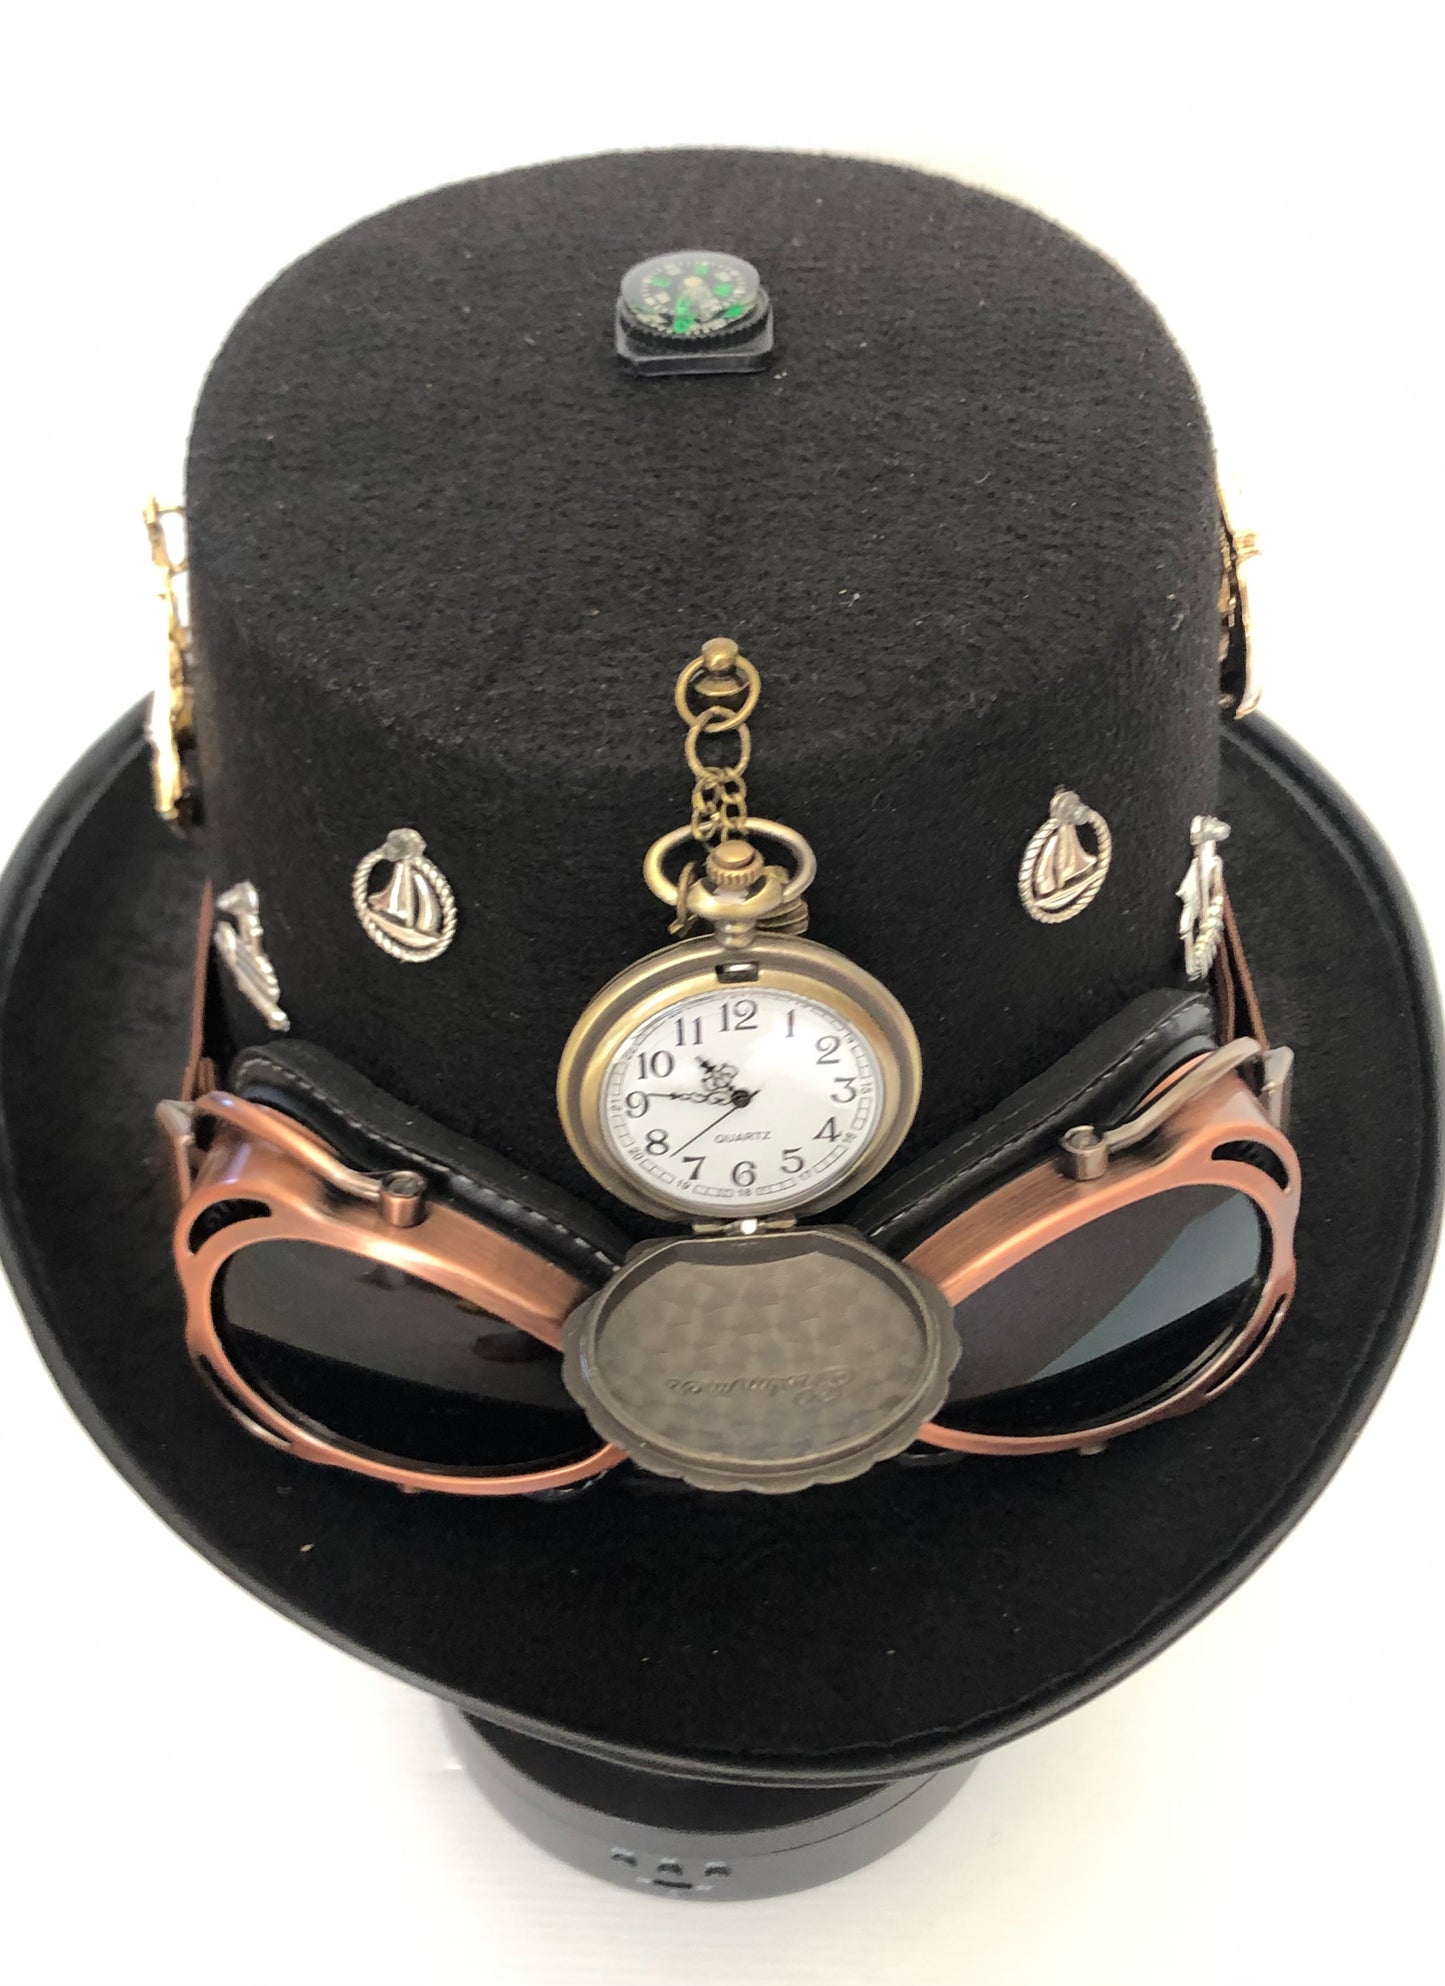 Steampunk Style Hat with Goggles (Item #386)